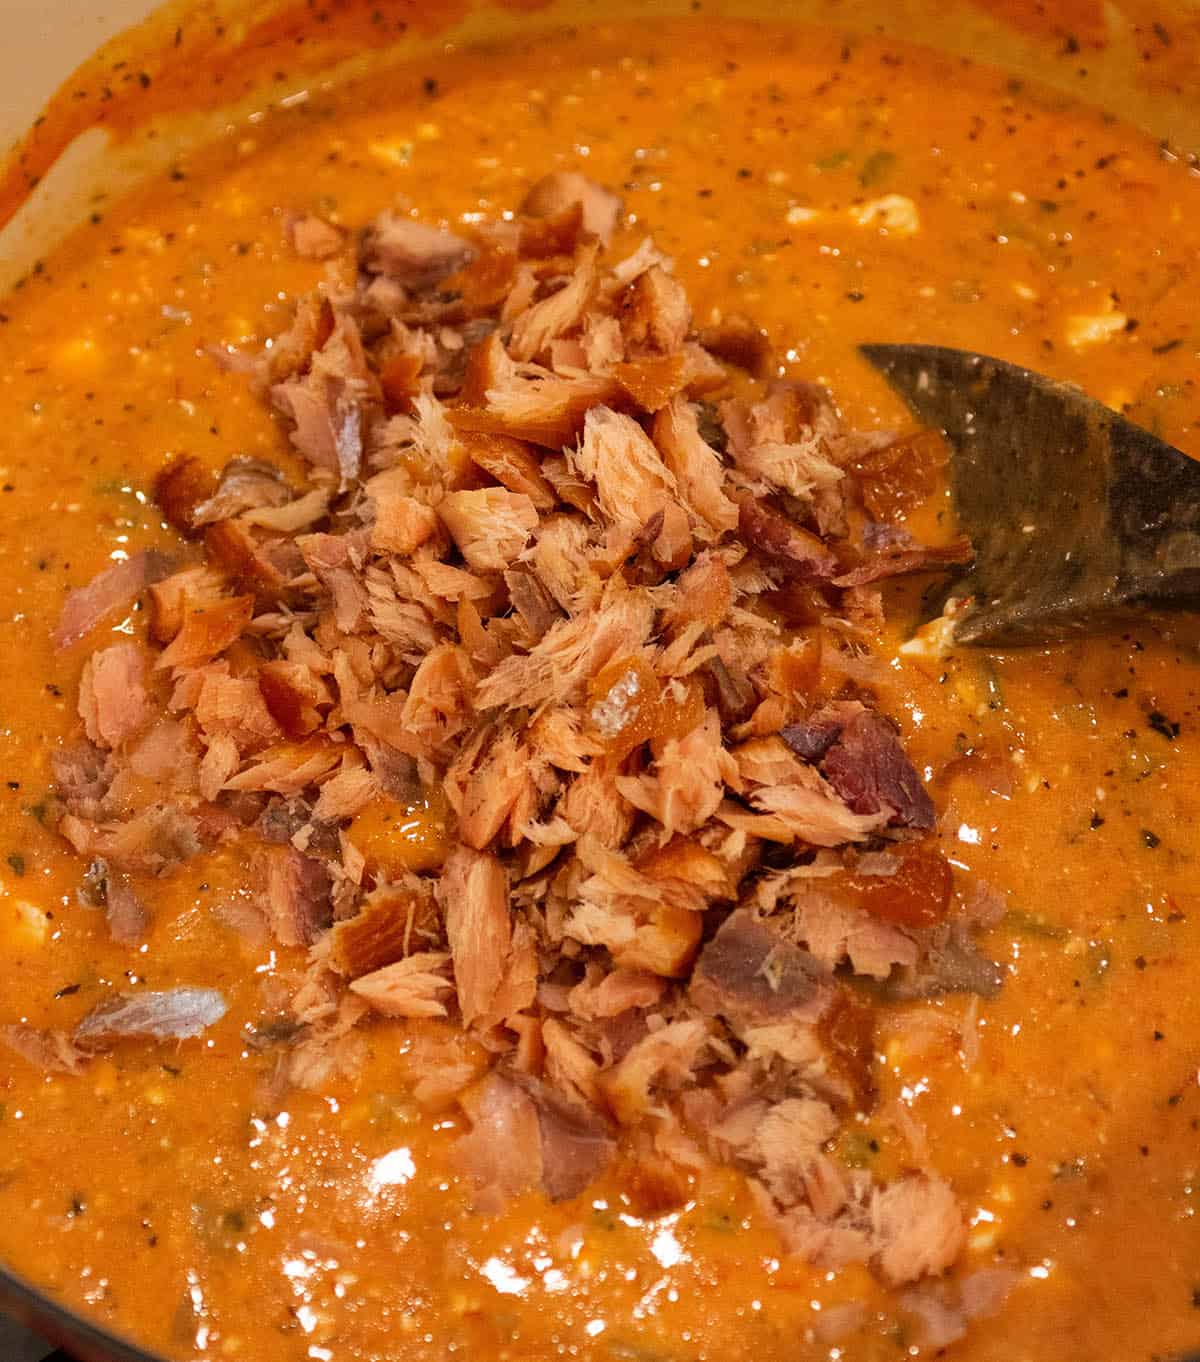 Chunks of smoked salmon being added to a chowder. 